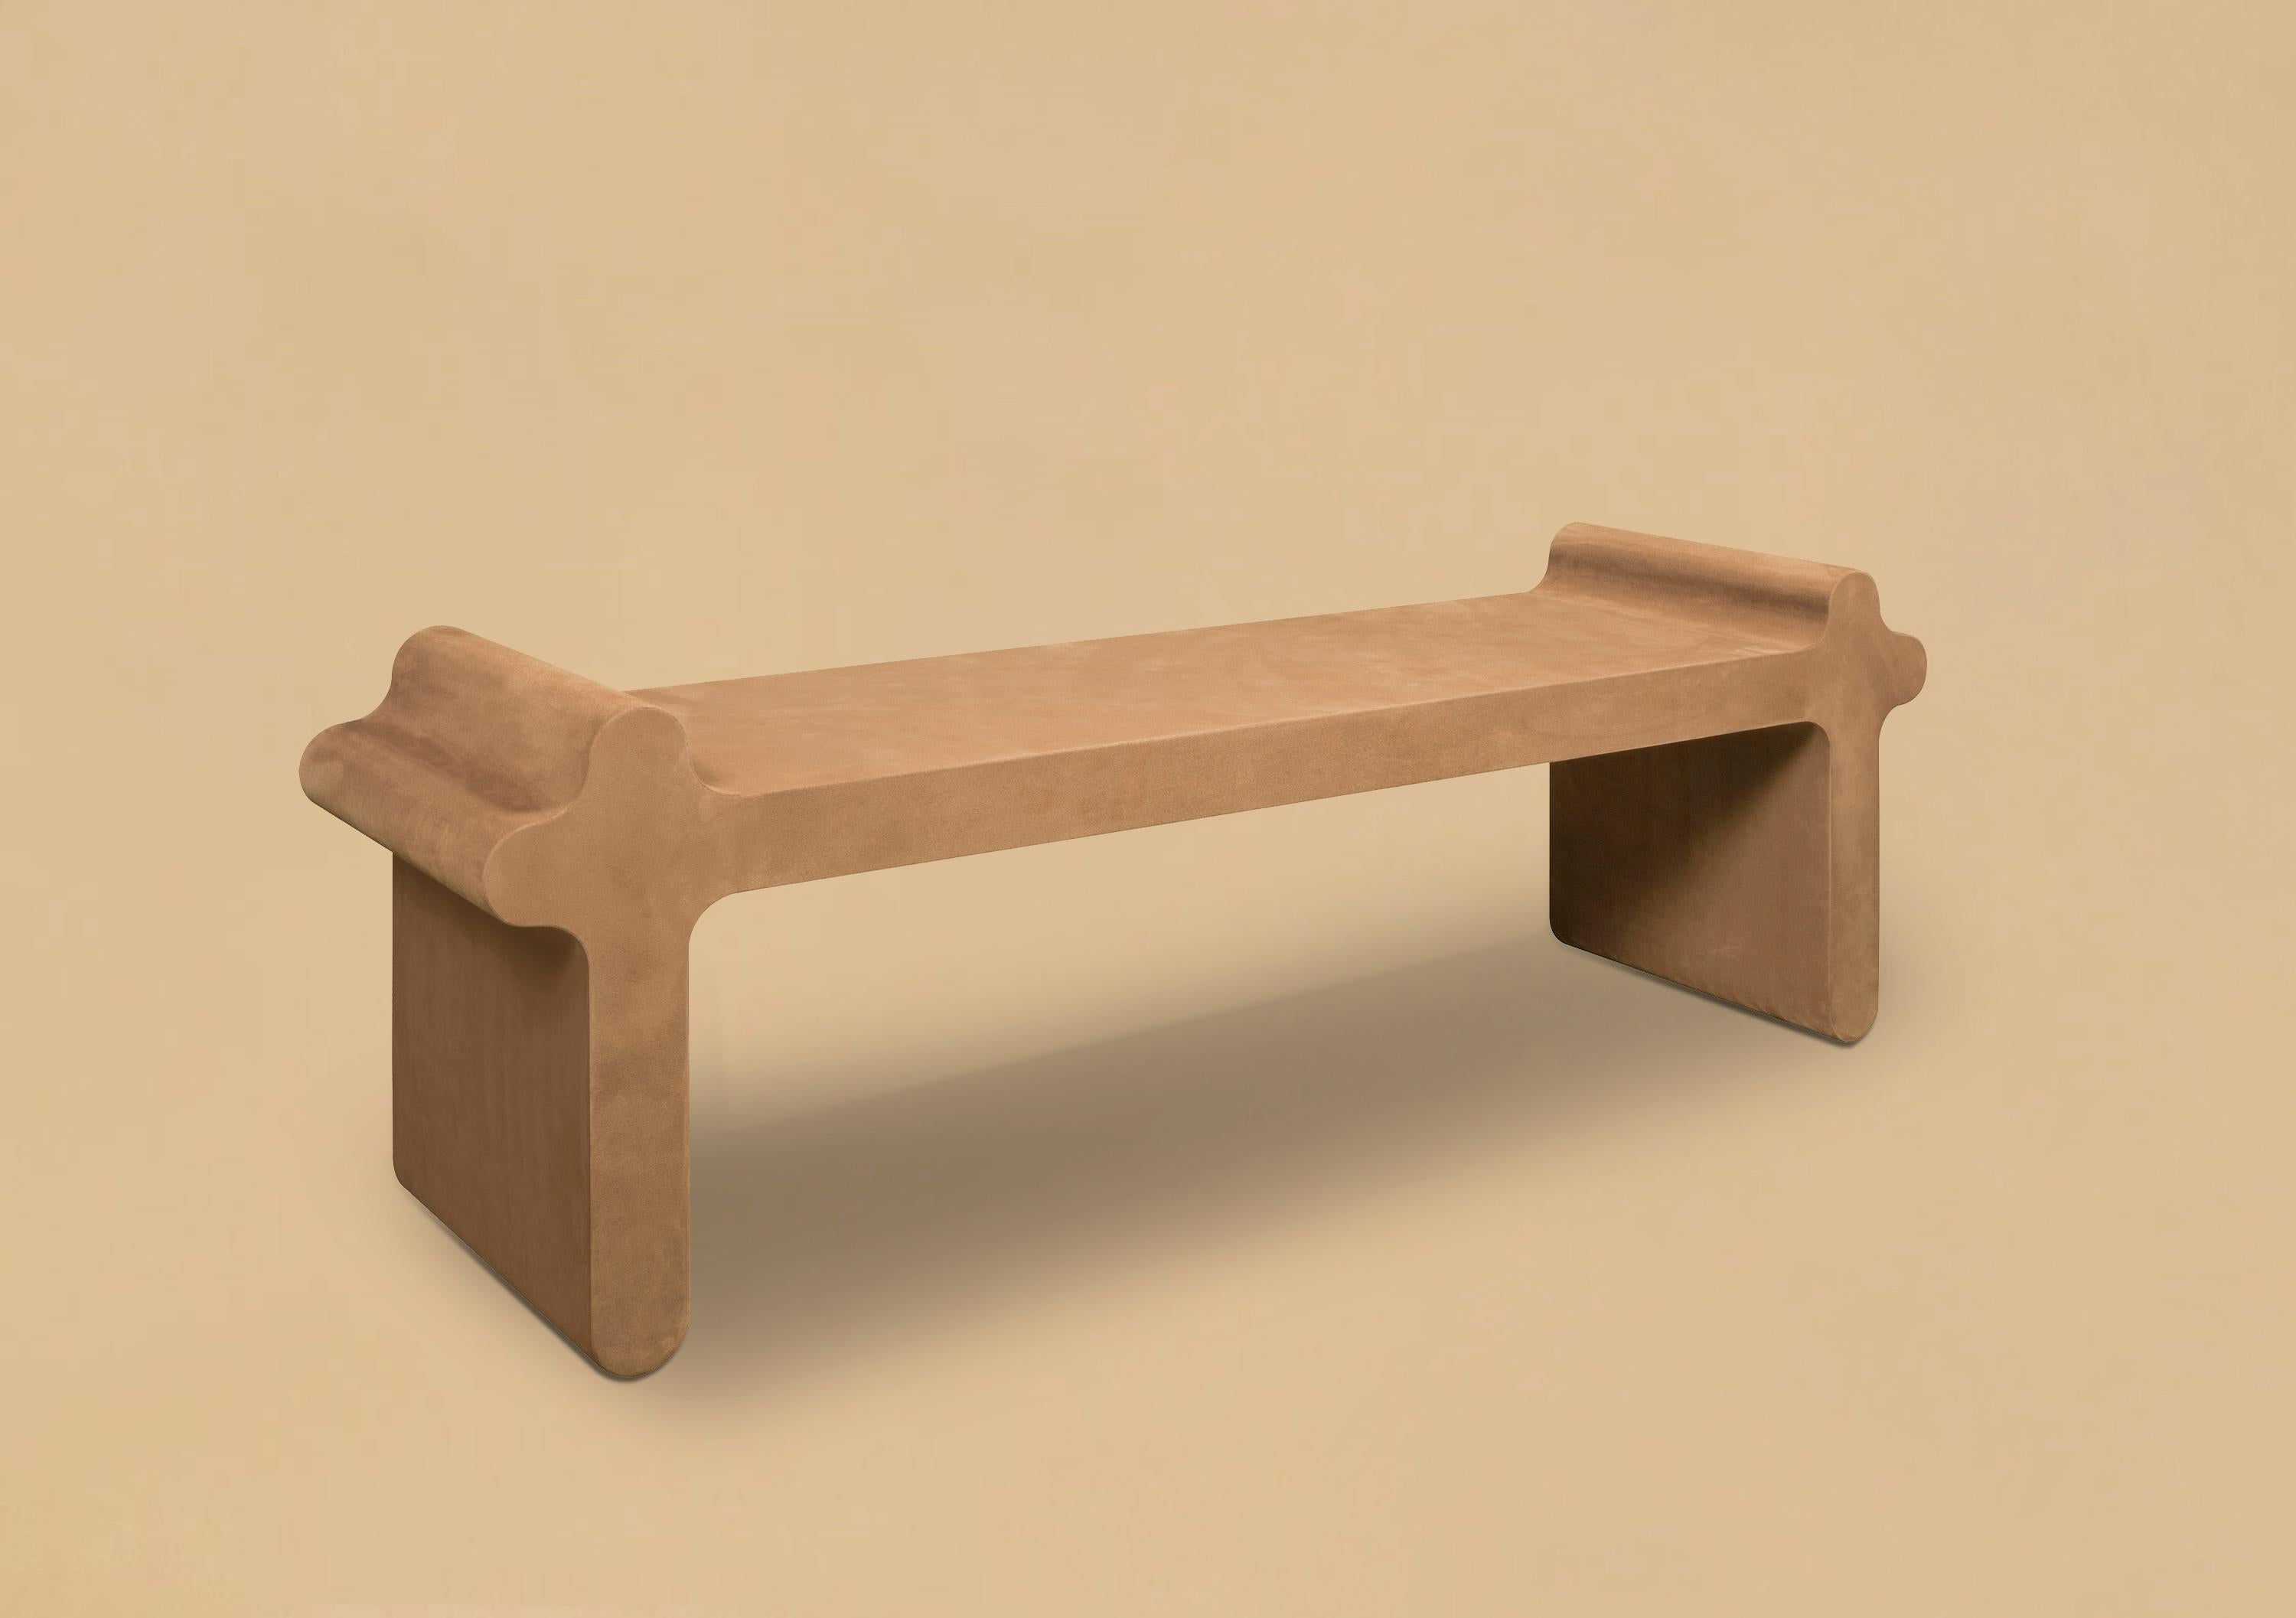 Contemporary suede leather bench - Ossicle N. 1 by Francesco Balzano for Giobagnara.
The object presented in the image has following finish: A30 Tobacco Suede Leather.

A clean and essential design distinguished by smooth and delicate lines, this